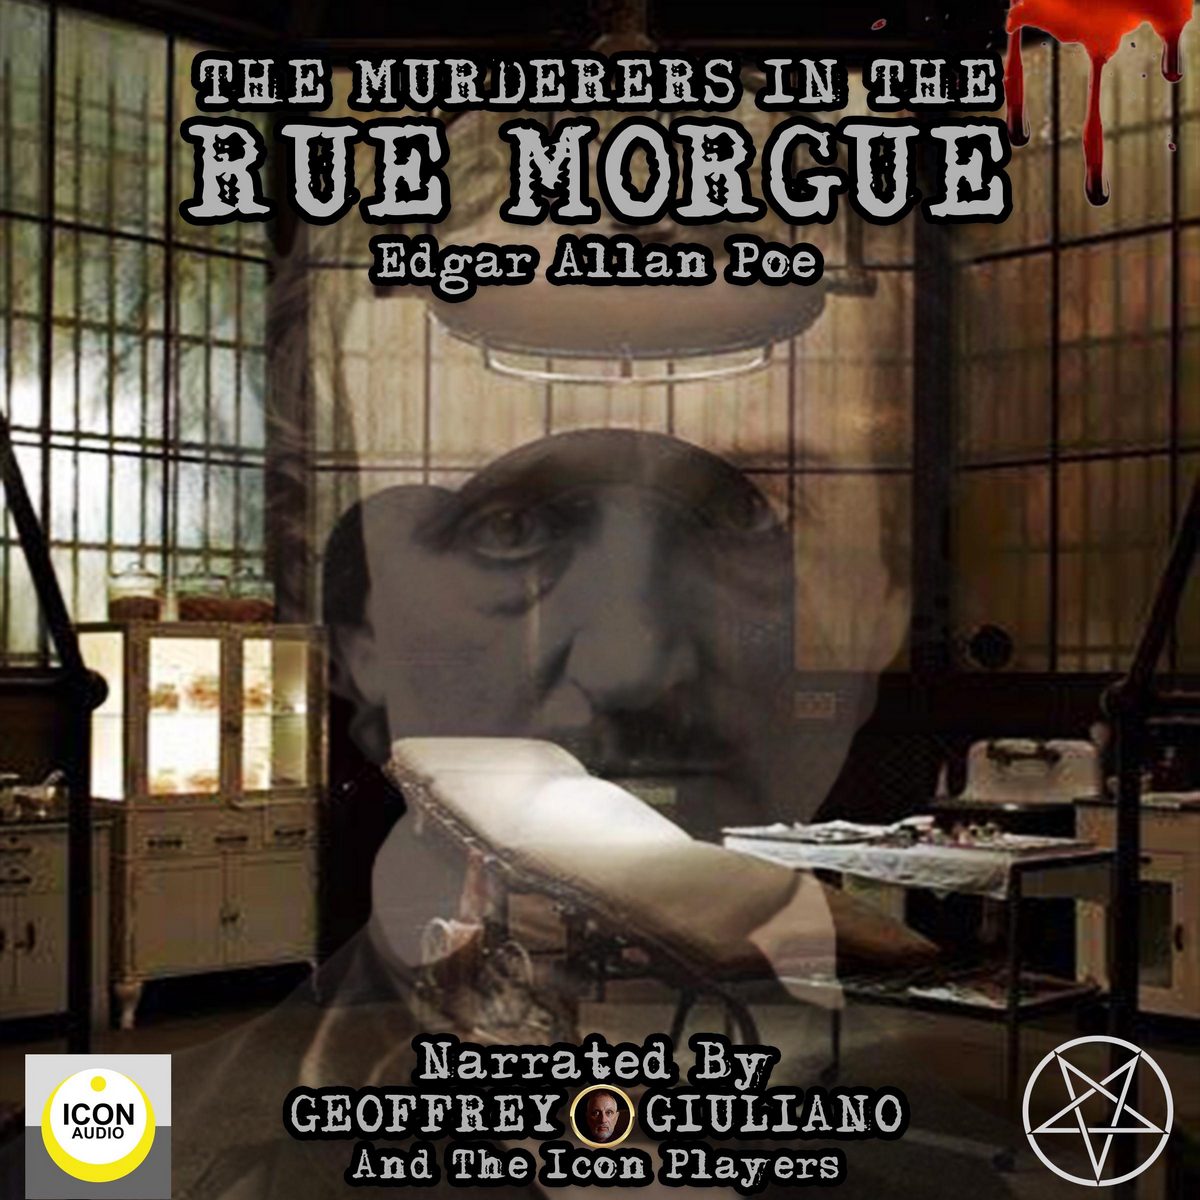 The Murderers In The Rue Morgue